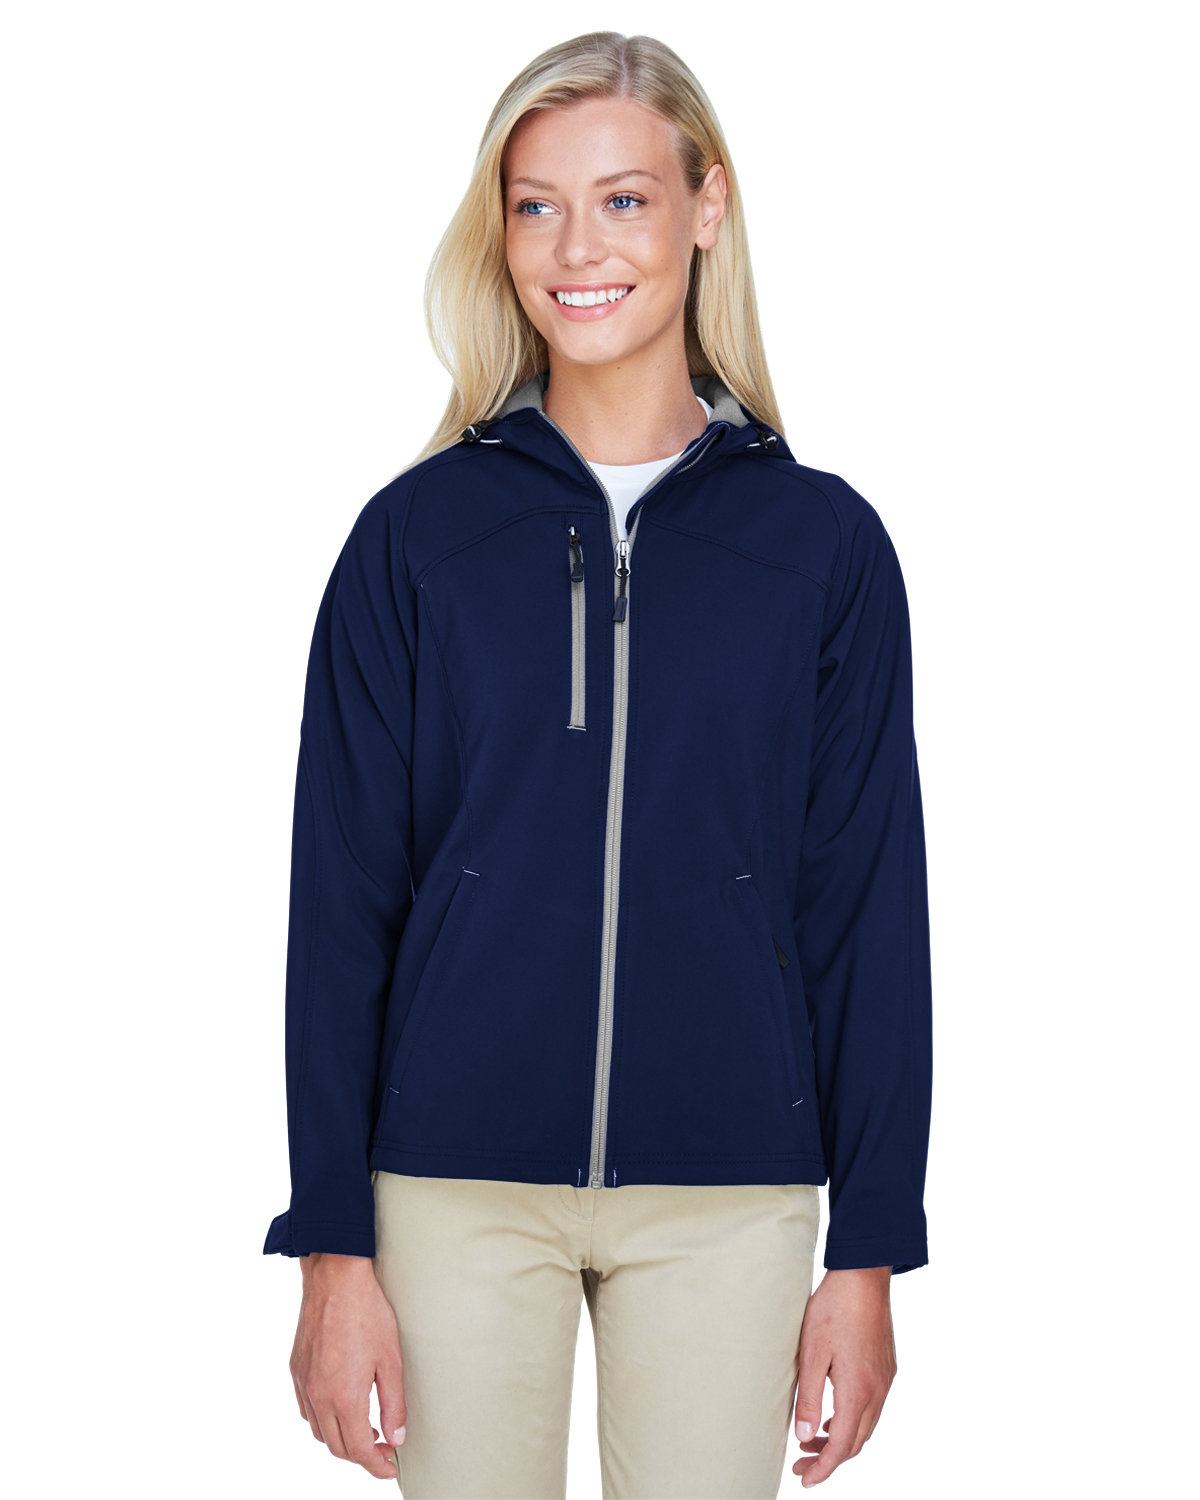 North End Ladies' Prospect Two-Layer Fleece Bonded Soft Shell Hooded Jacket CLASSIC NAVY 